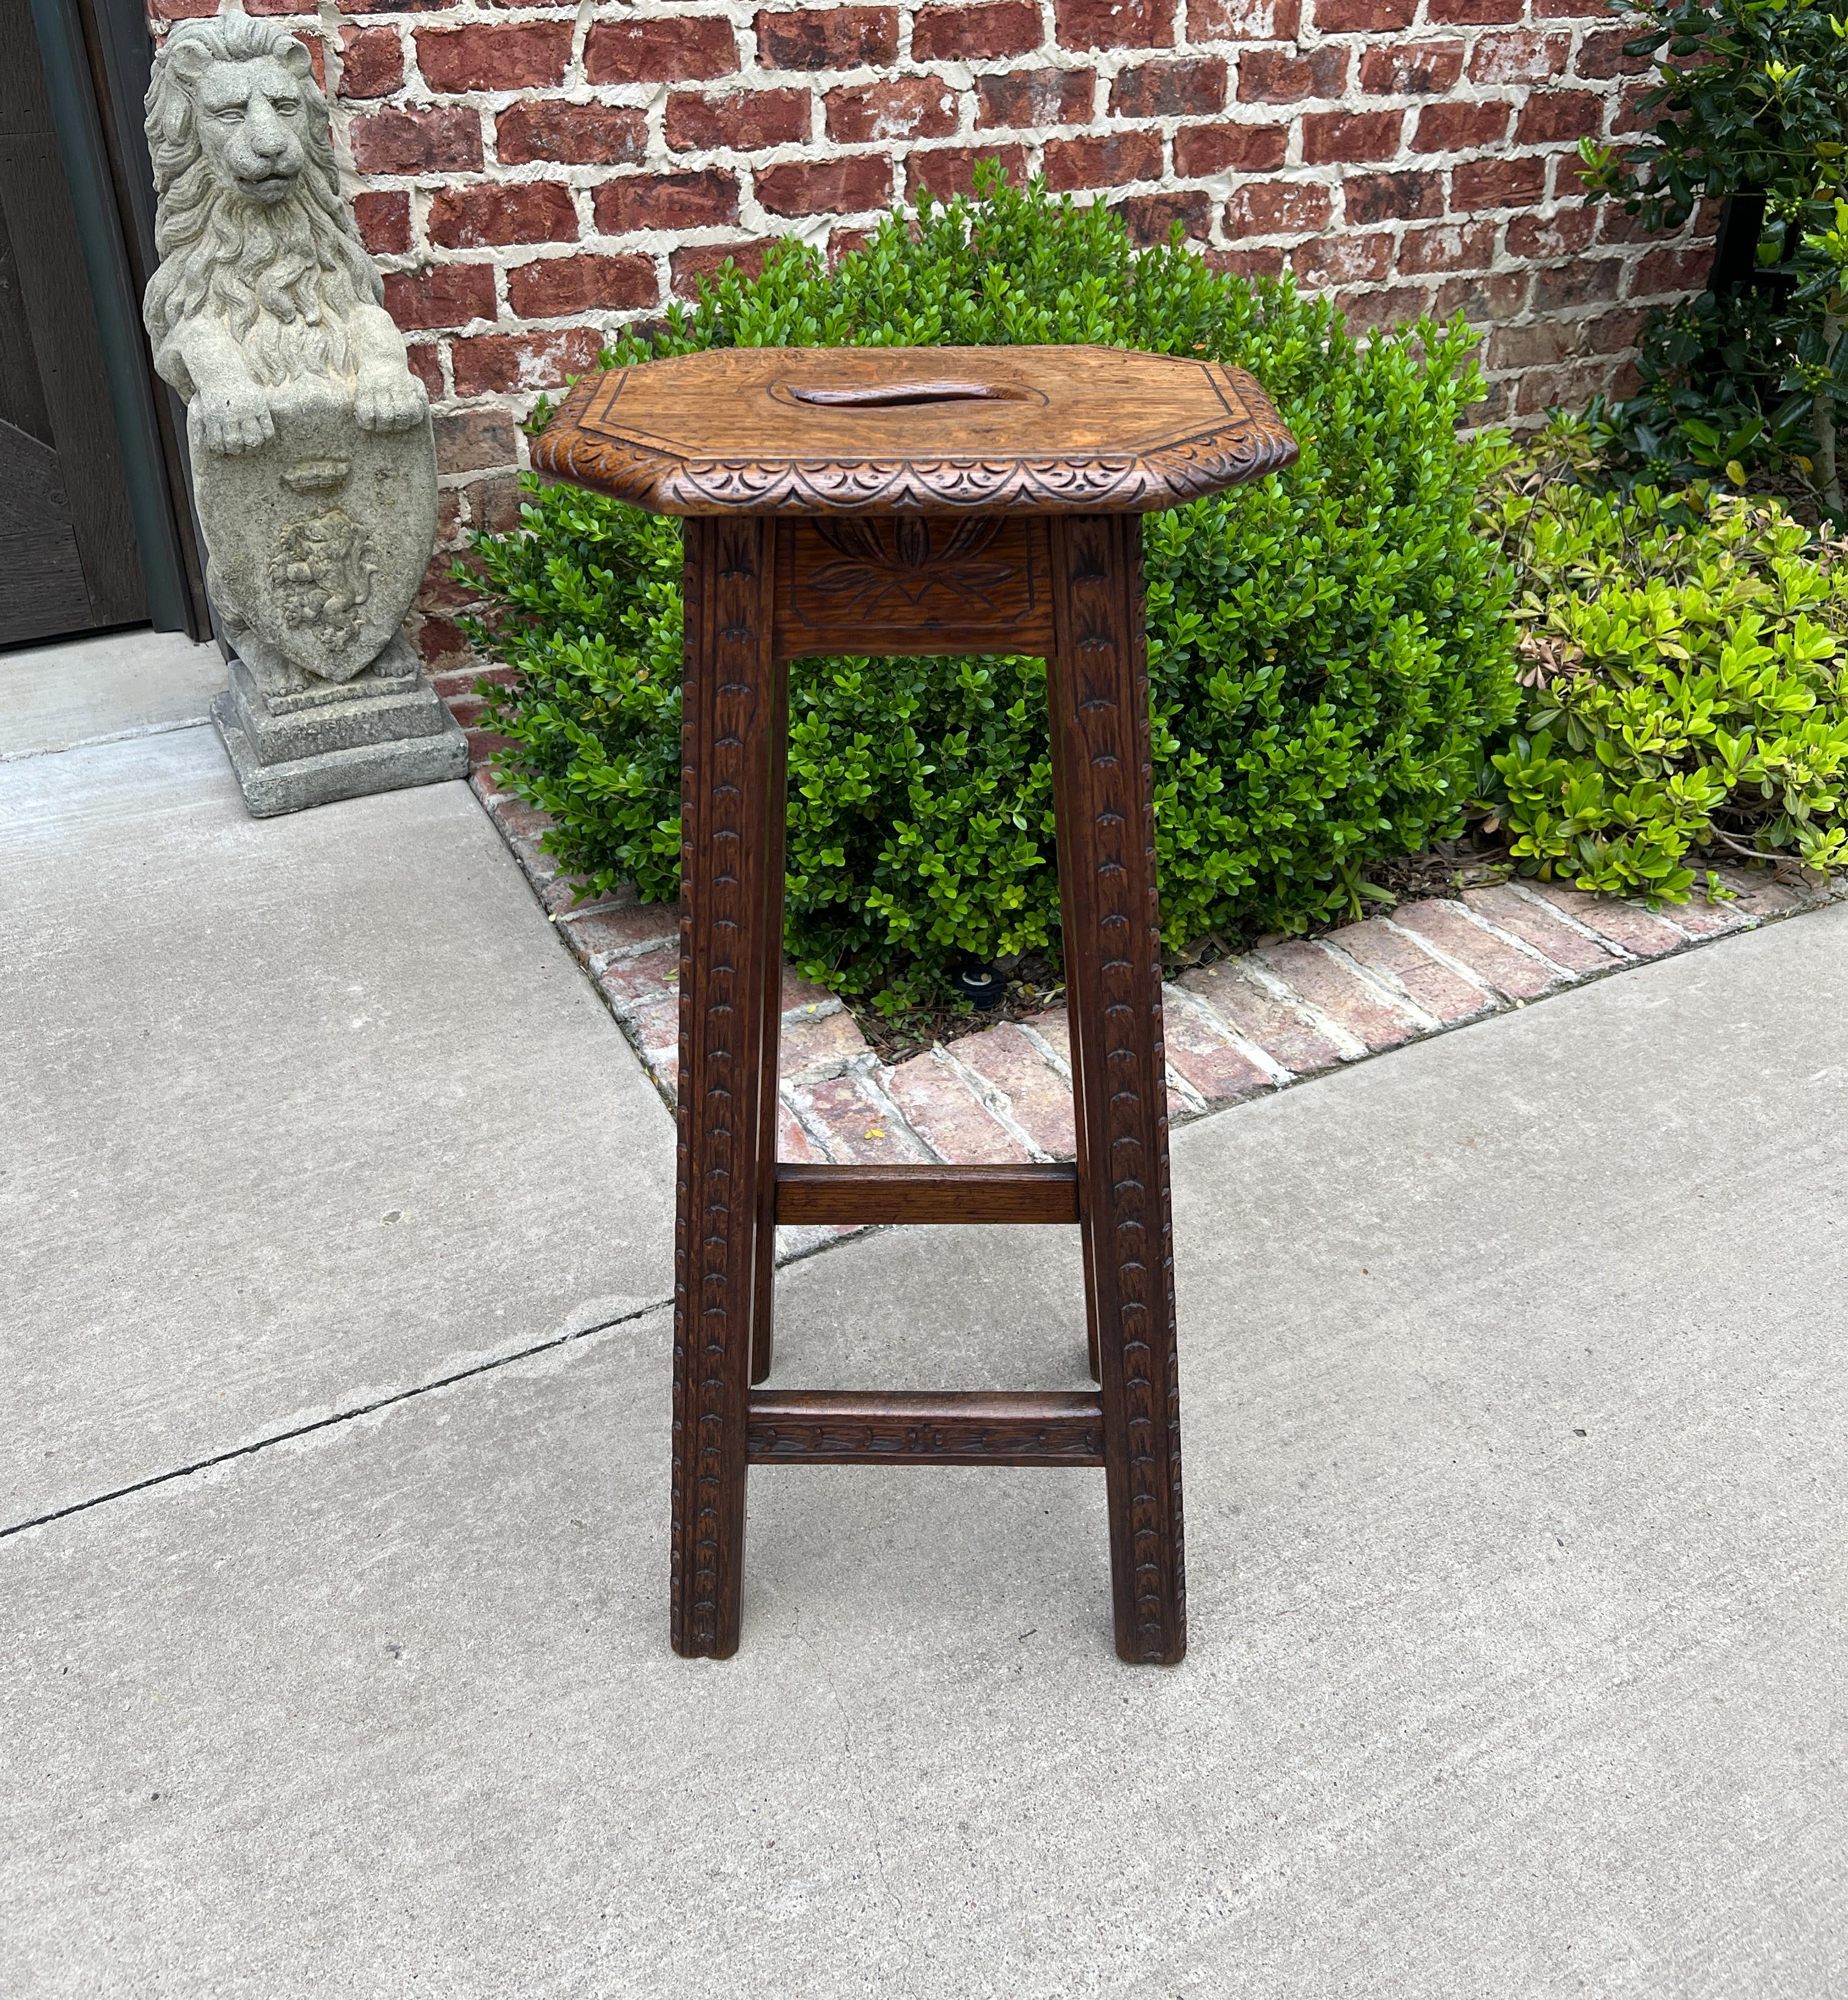 CHARMING and UNIQUE~~Antique English Carved Oak Pedestal, Plant stand, End Table, Display Table OR Barstool~~30.5